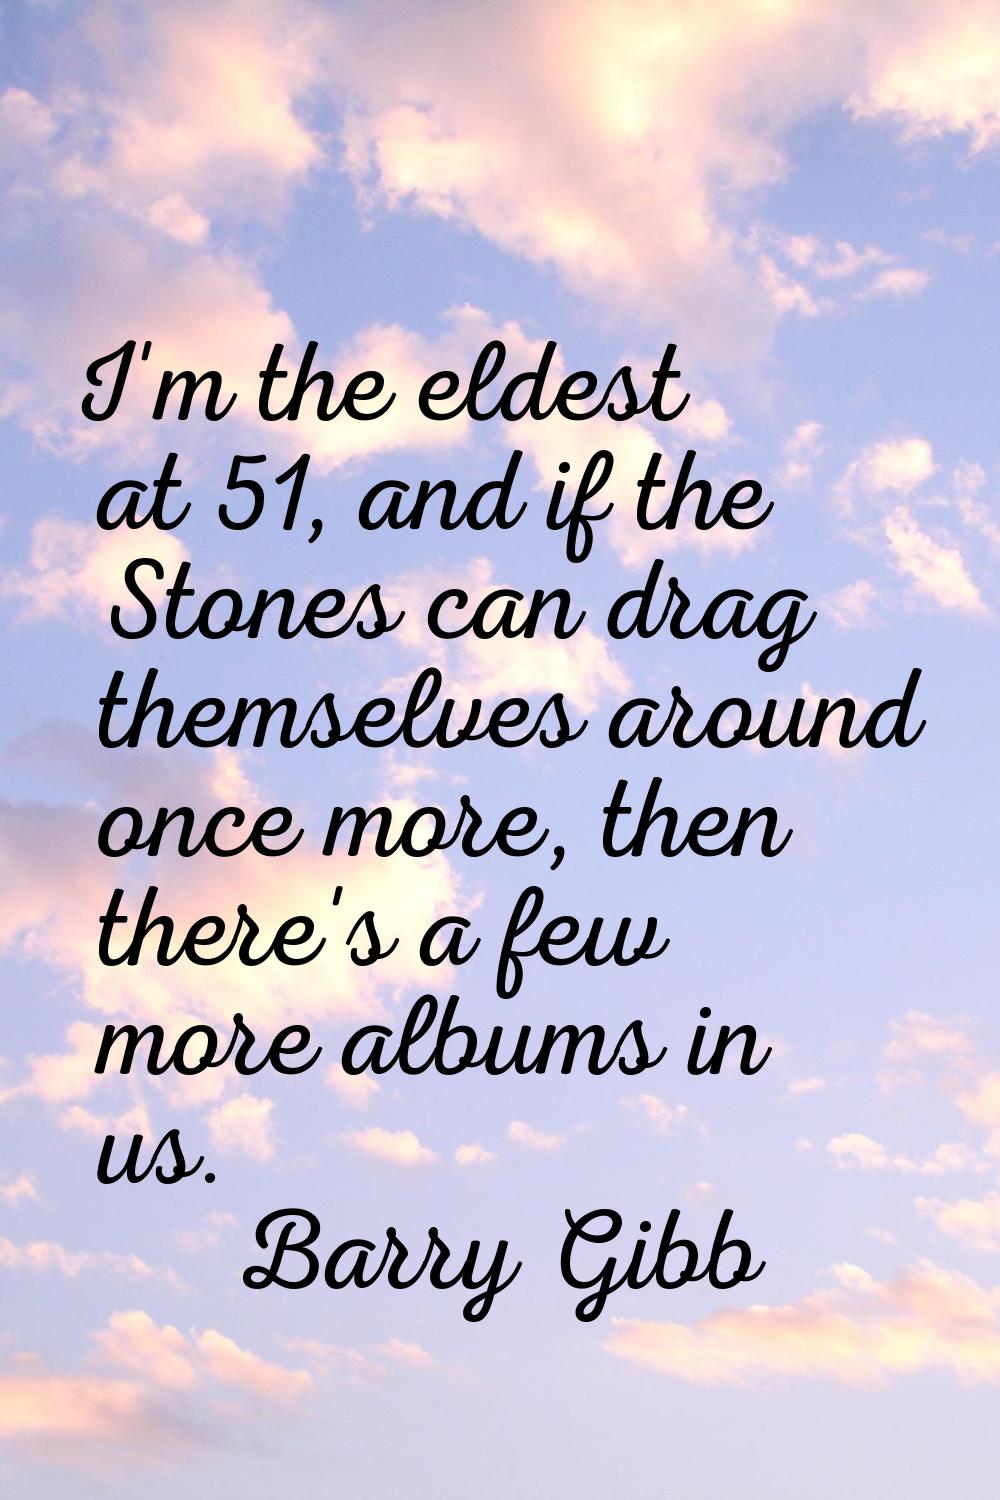 I'm the eldest at 51, and if the Stones can drag themselves around once more, then there's a few mo